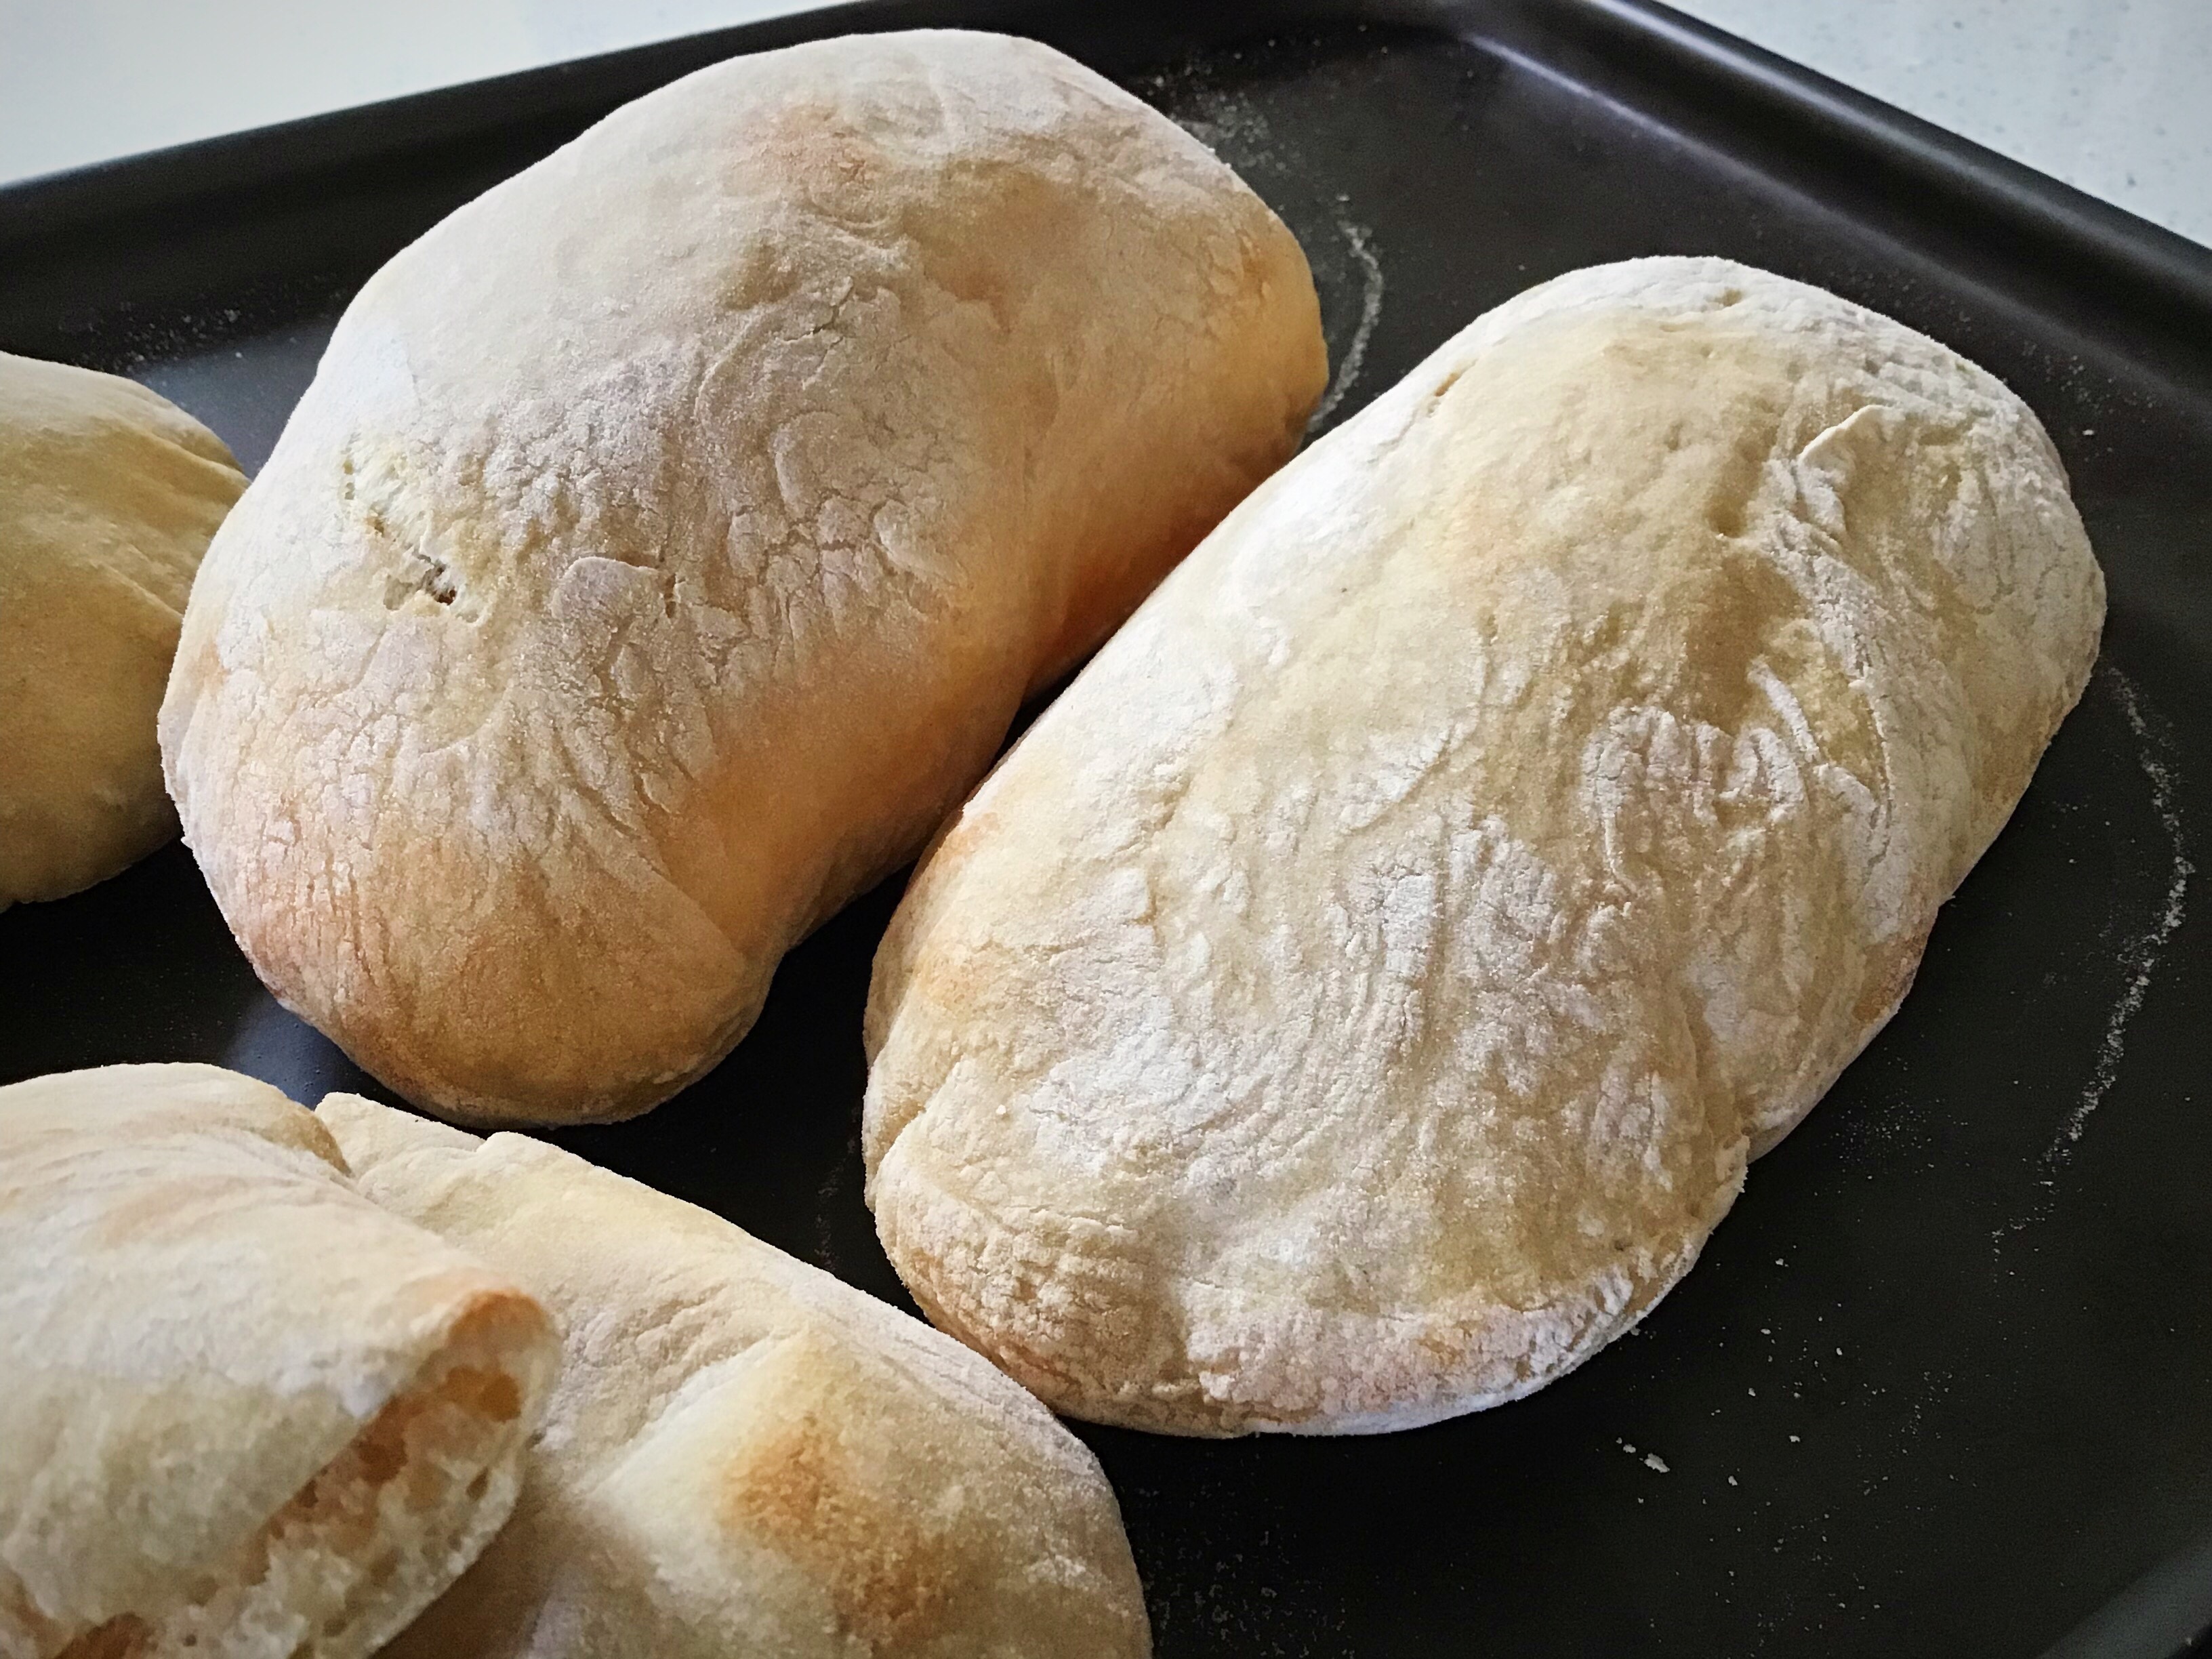 Two loaves of bread sitting on a pan.